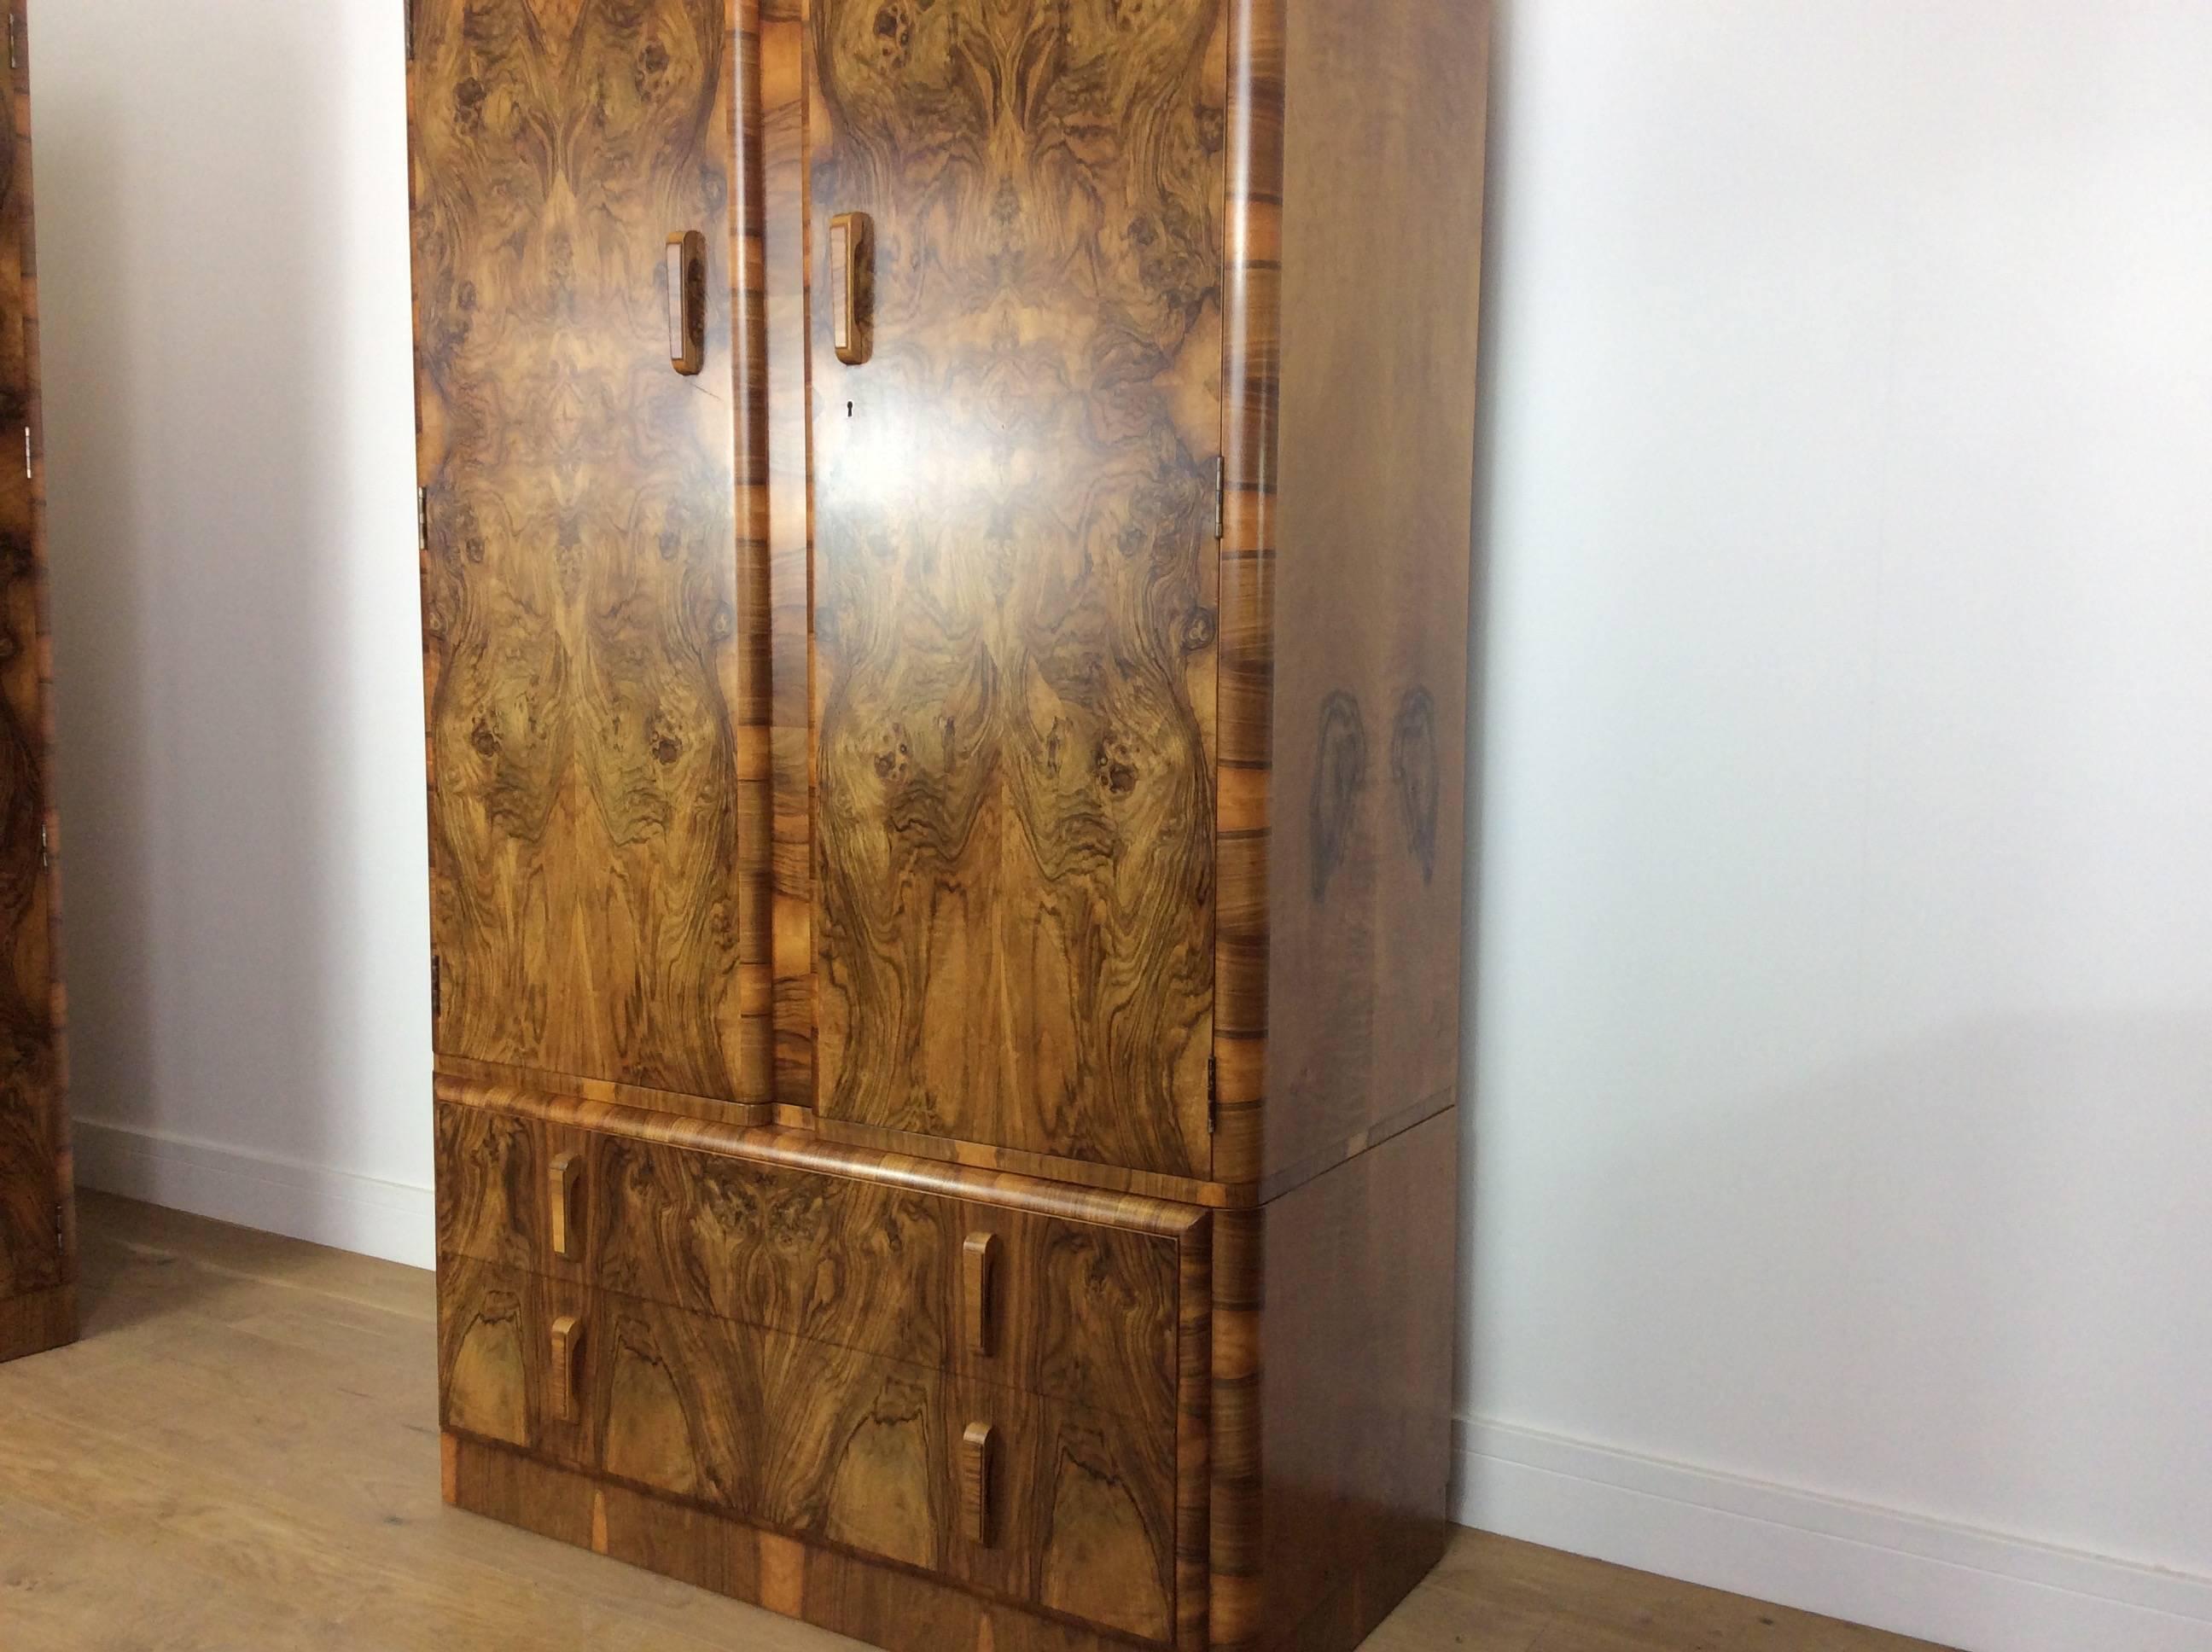 Art Deco gentleman's wardrobe with the most stunning figured walnut.
This really is the most stunning Art Deco tallboy, beautiful figured walnut veneer nice curved edges.
Nicely fitted out with compartments and hanging space, also two deep drawers